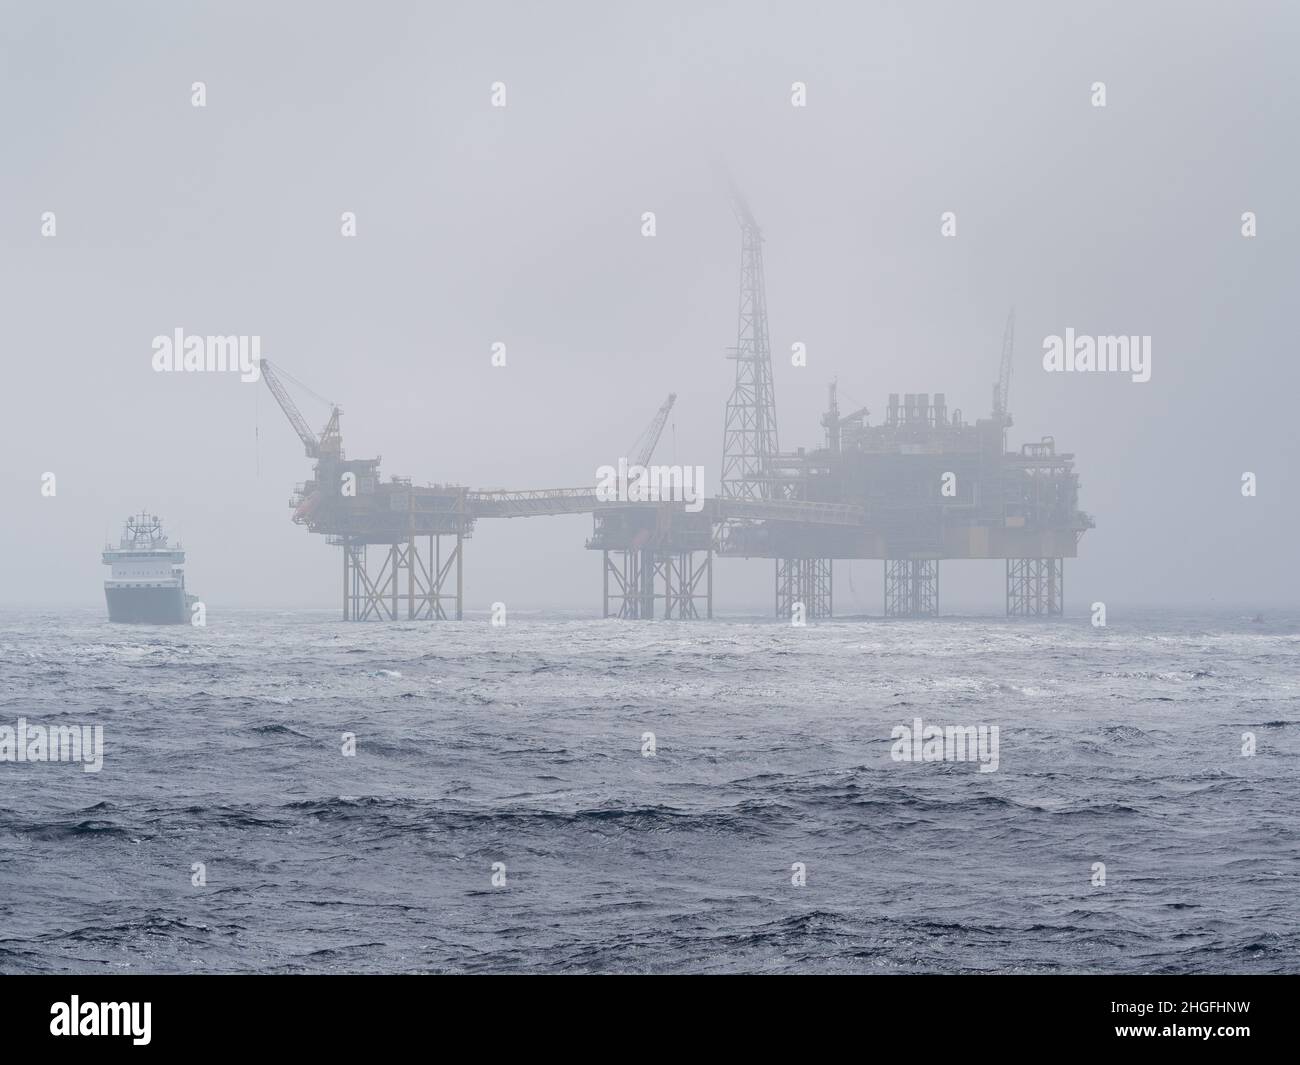 Offshore platform in the north sea. Offshore oil and gas production platform. Stock Photo